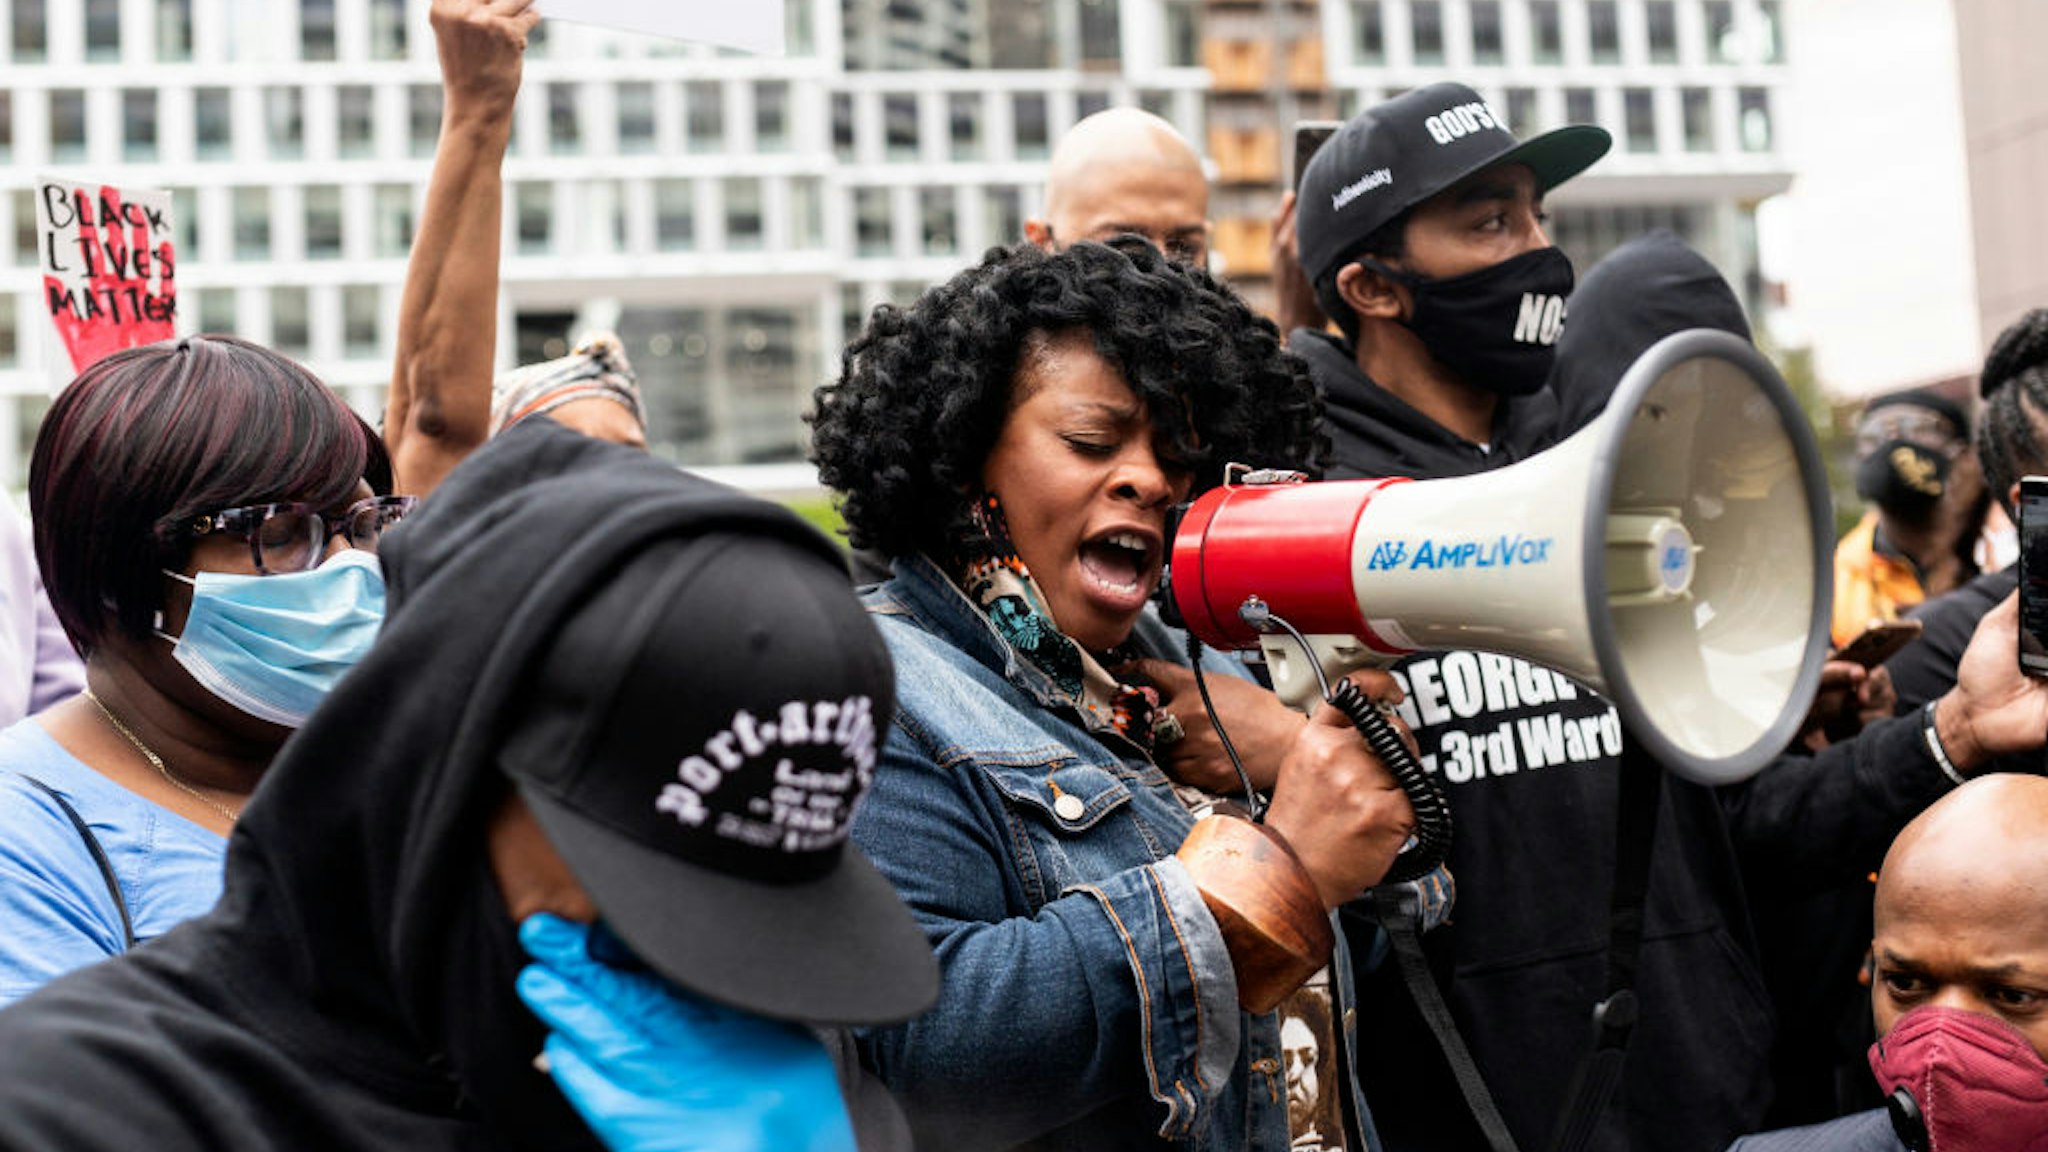 Jamela J. Pettiford sings during a protest with Former NBA player Stephen Jackson in response to the police killing of George Floyd outside the Hennepin County Government Center on May 29, 2020 in Minneapolis, Minnesota.